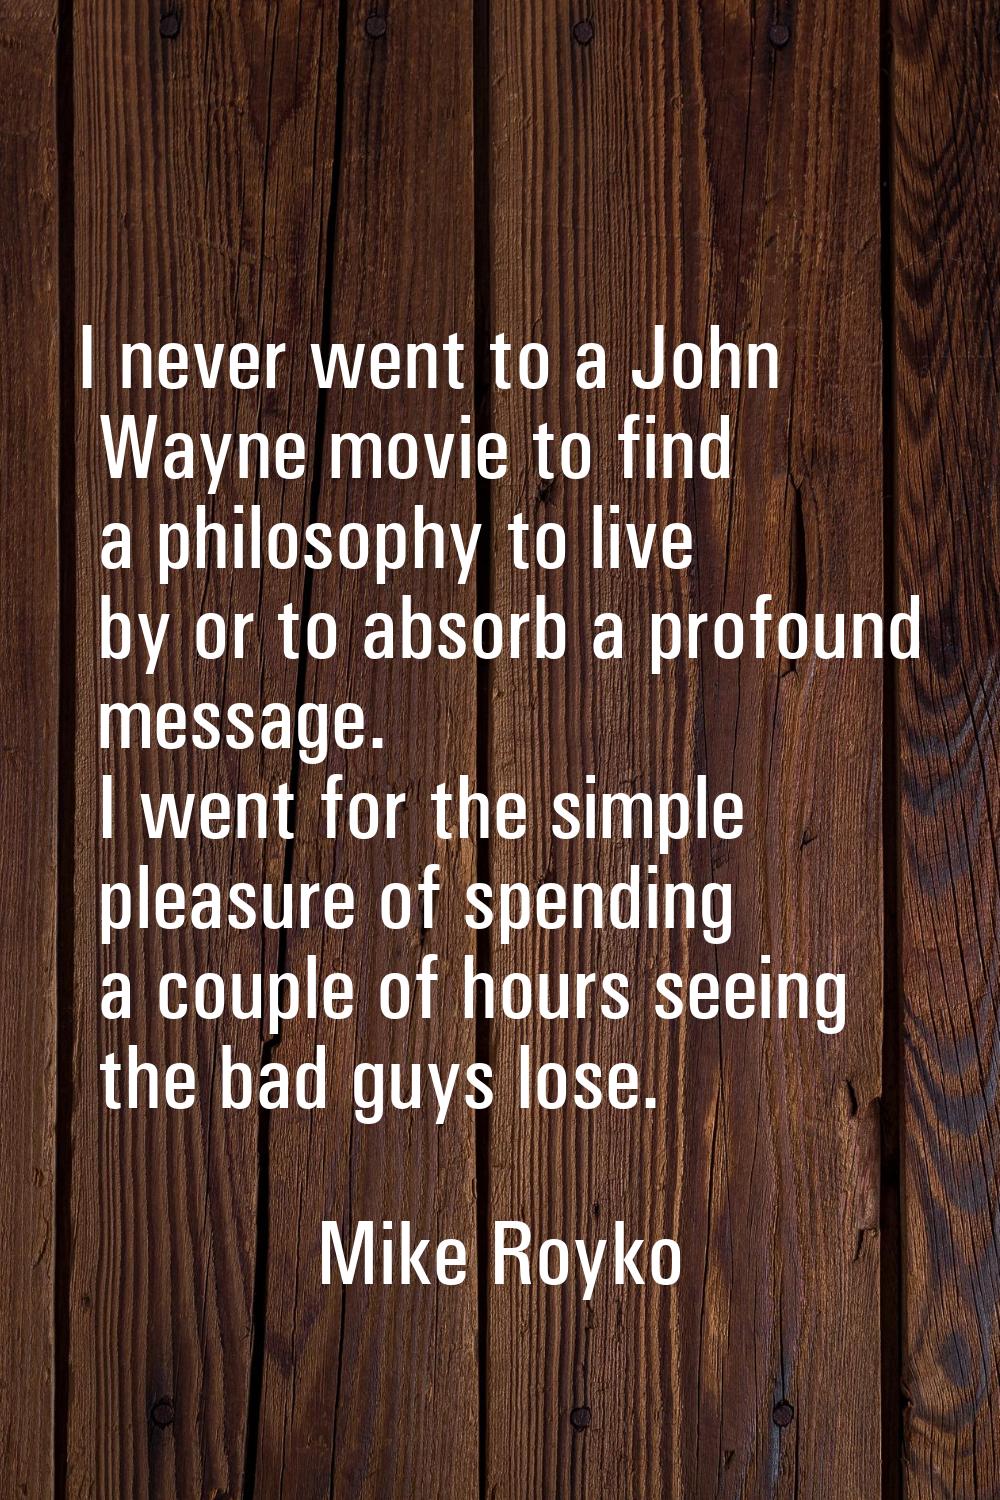 I never went to a John Wayne movie to find a philosophy to live by or to absorb a profound message.